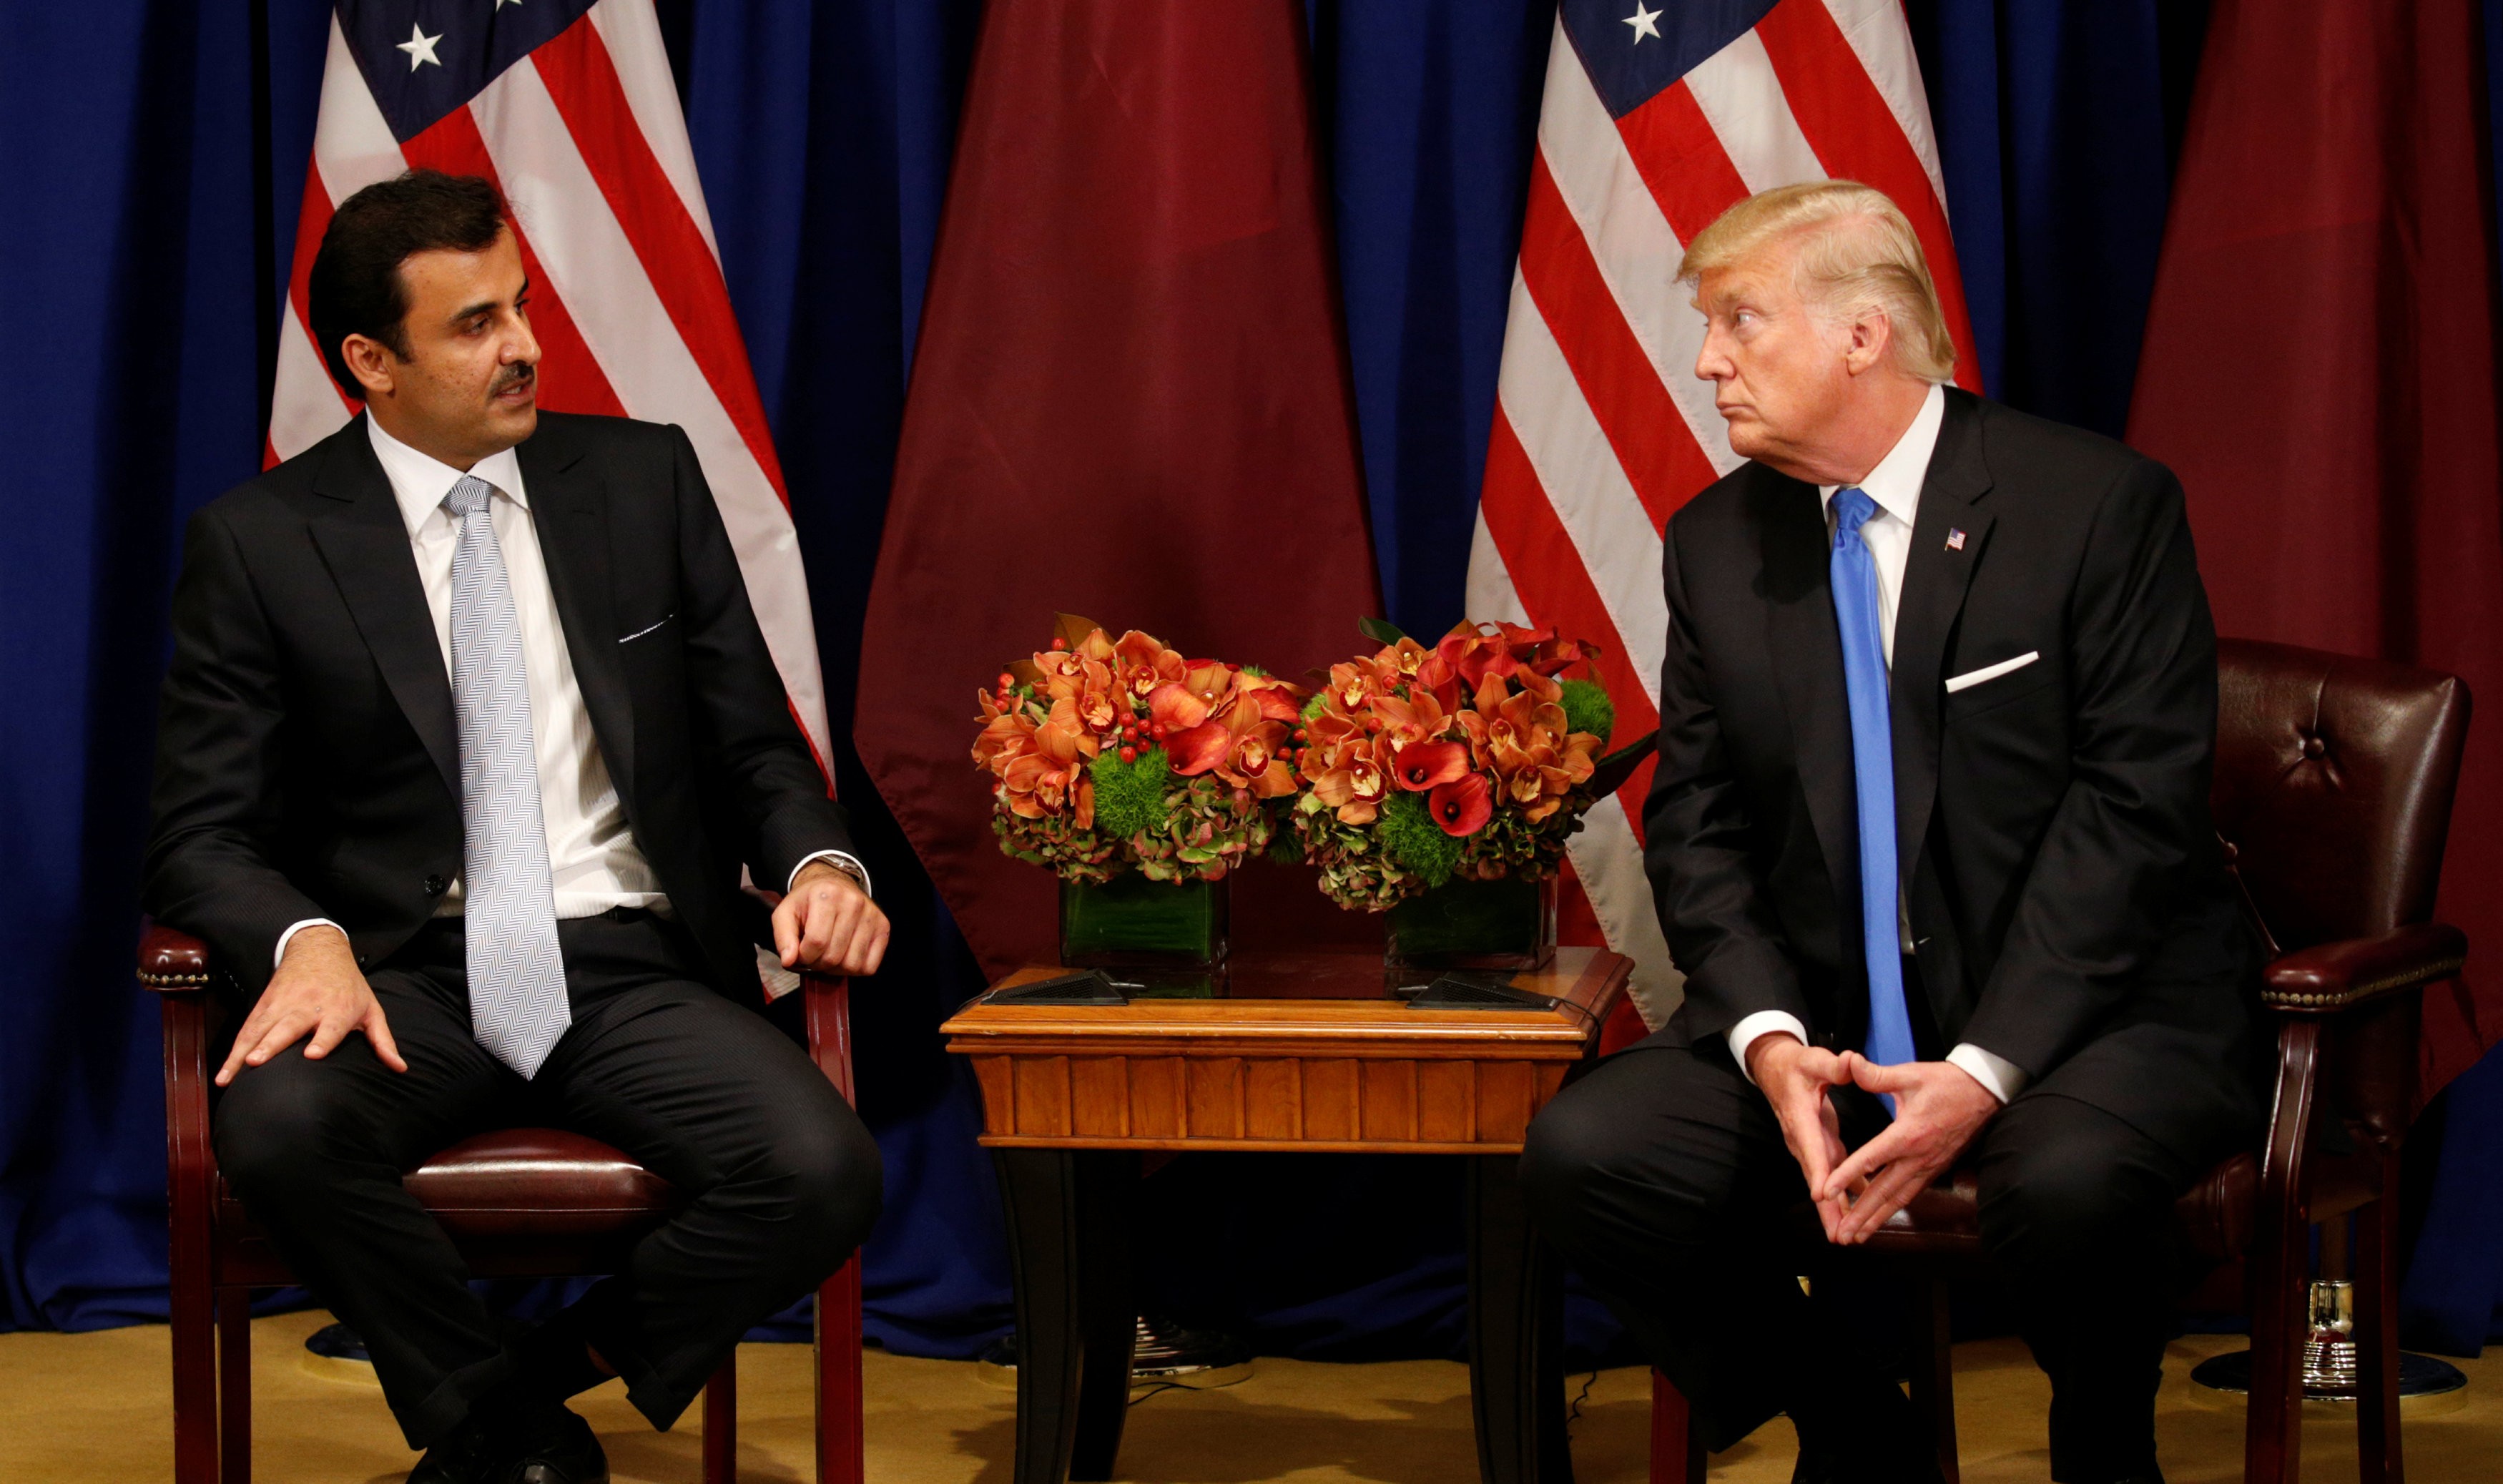 US President Donald Trump meets with Qatar's Emir Sheikh Tamim bin Hamad al-Thani in New York, at the United Nations on September 19, 2017. Photo: Reuters